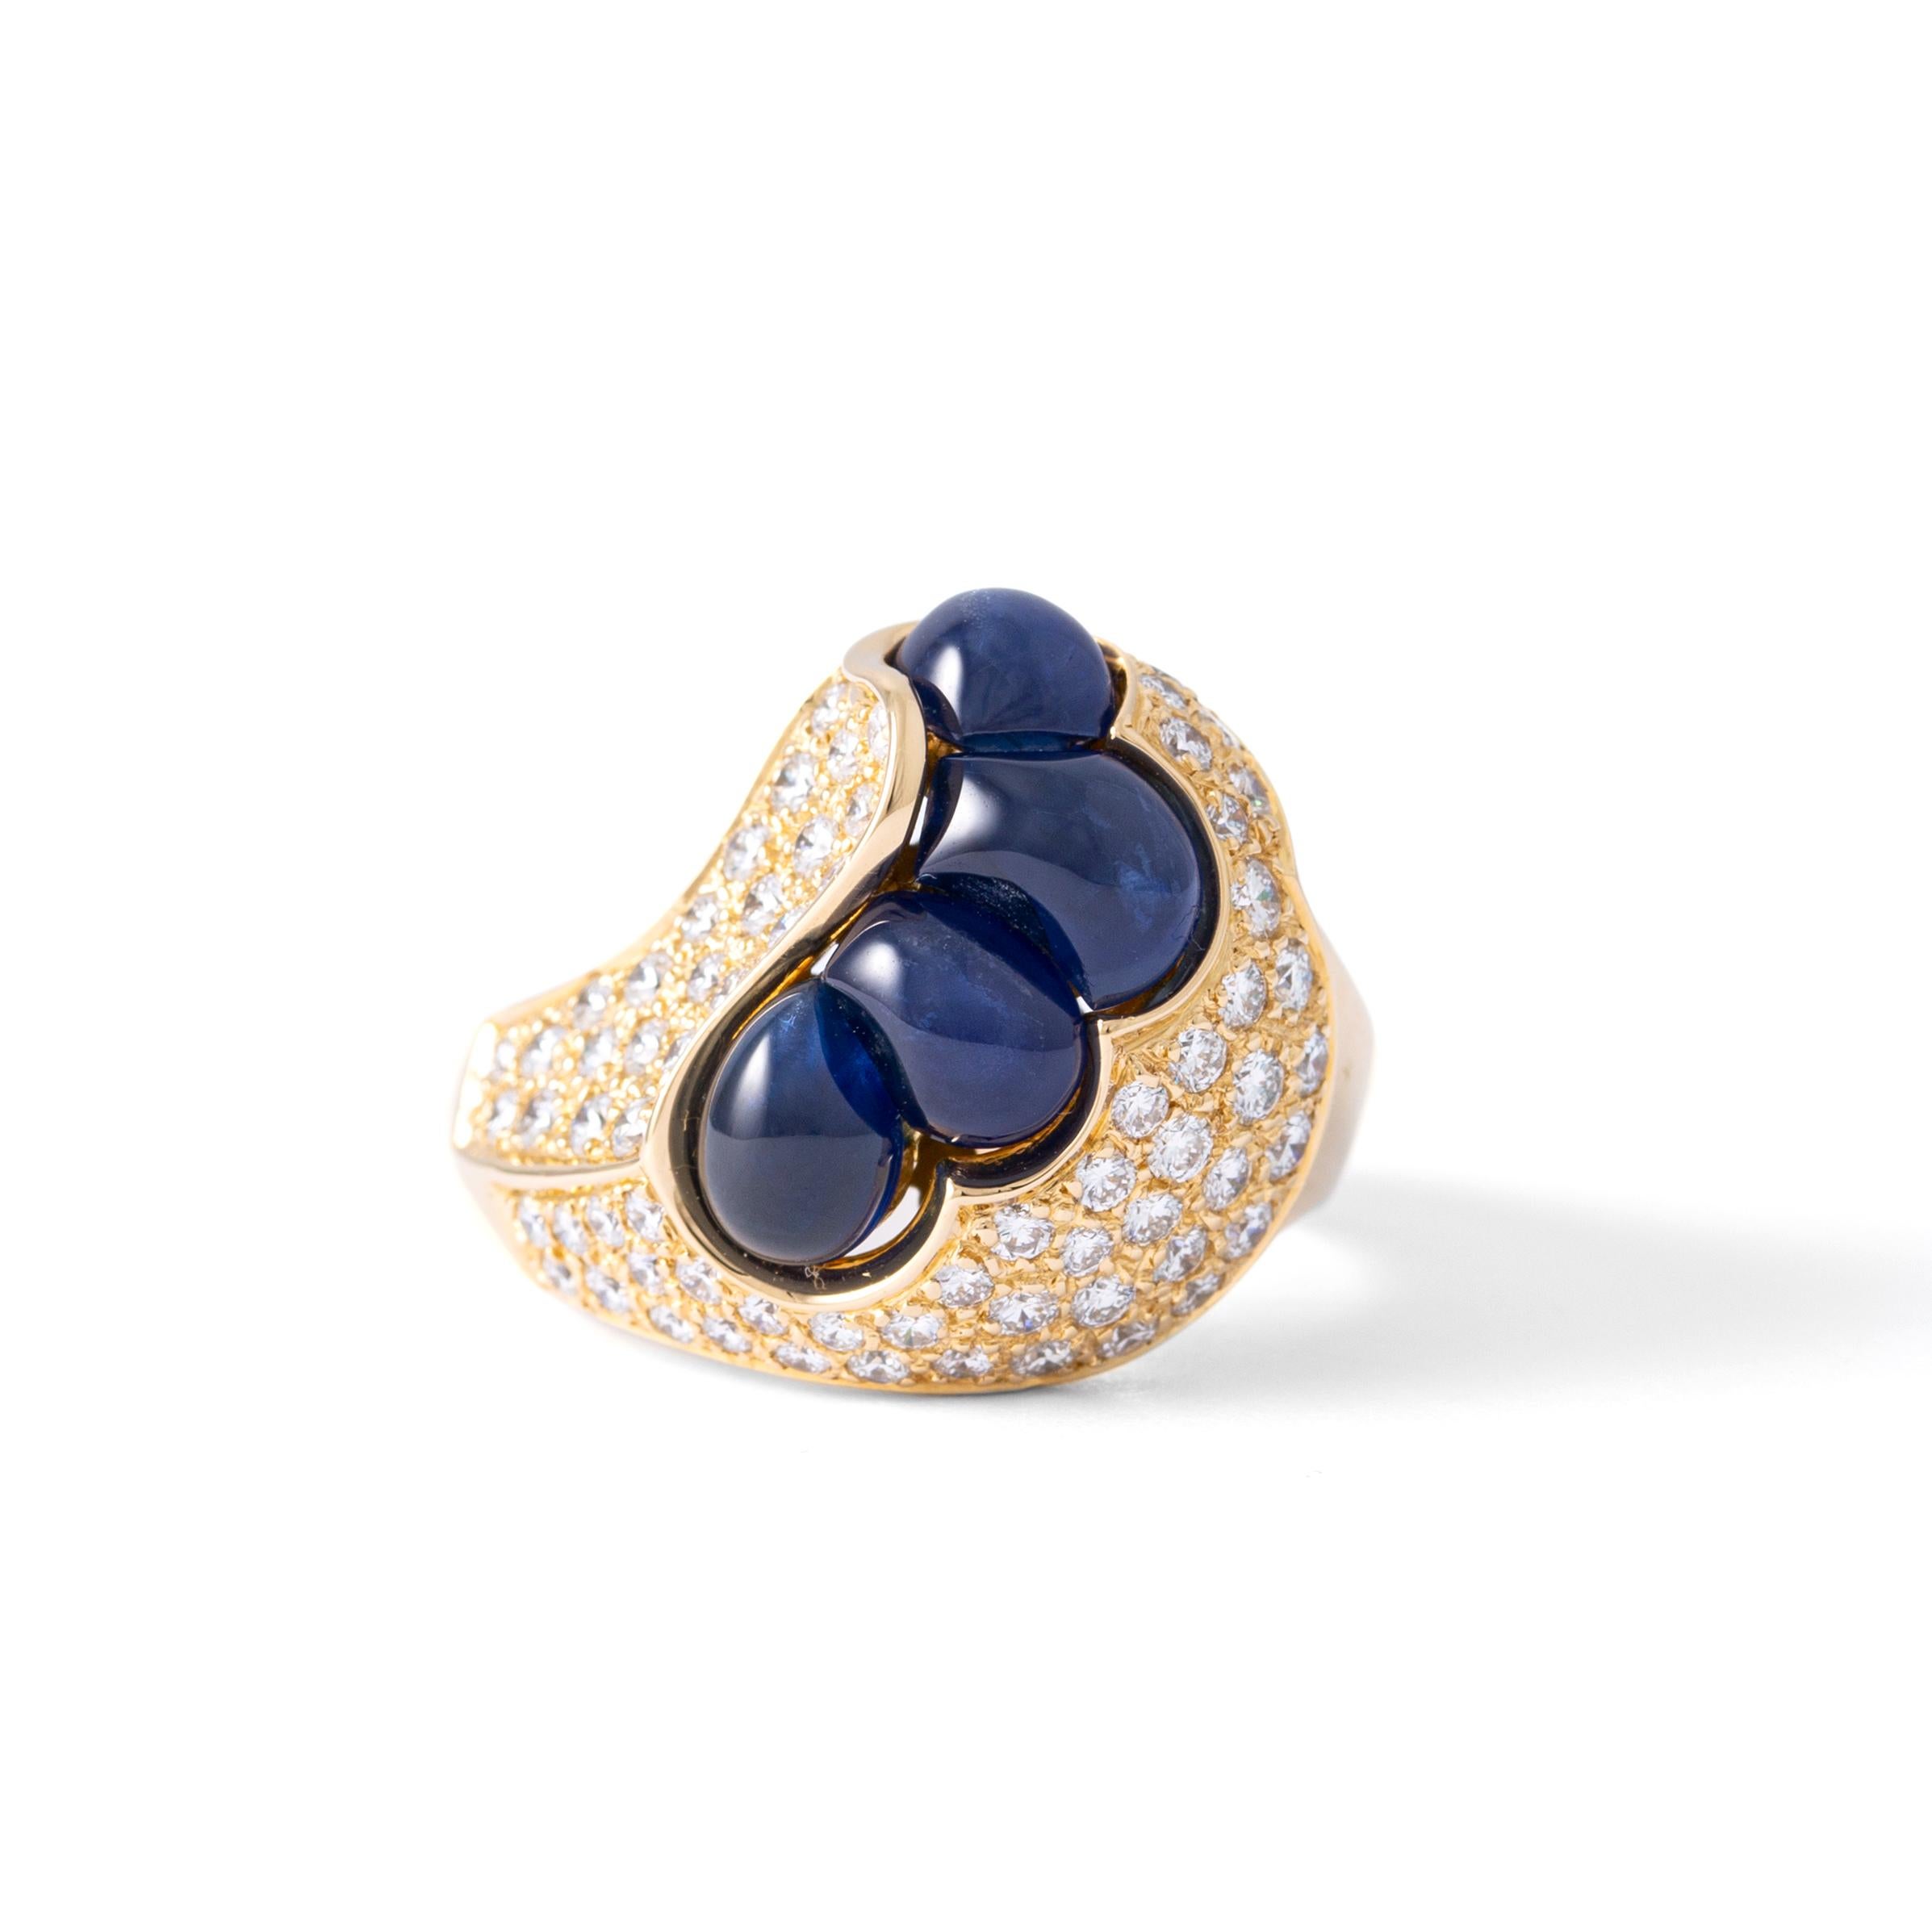 Ring in 18kt yellow gold set with 4 cabochon cut sapphires 4.13 cts and 70 diamonds 1.06 cts Size 53        